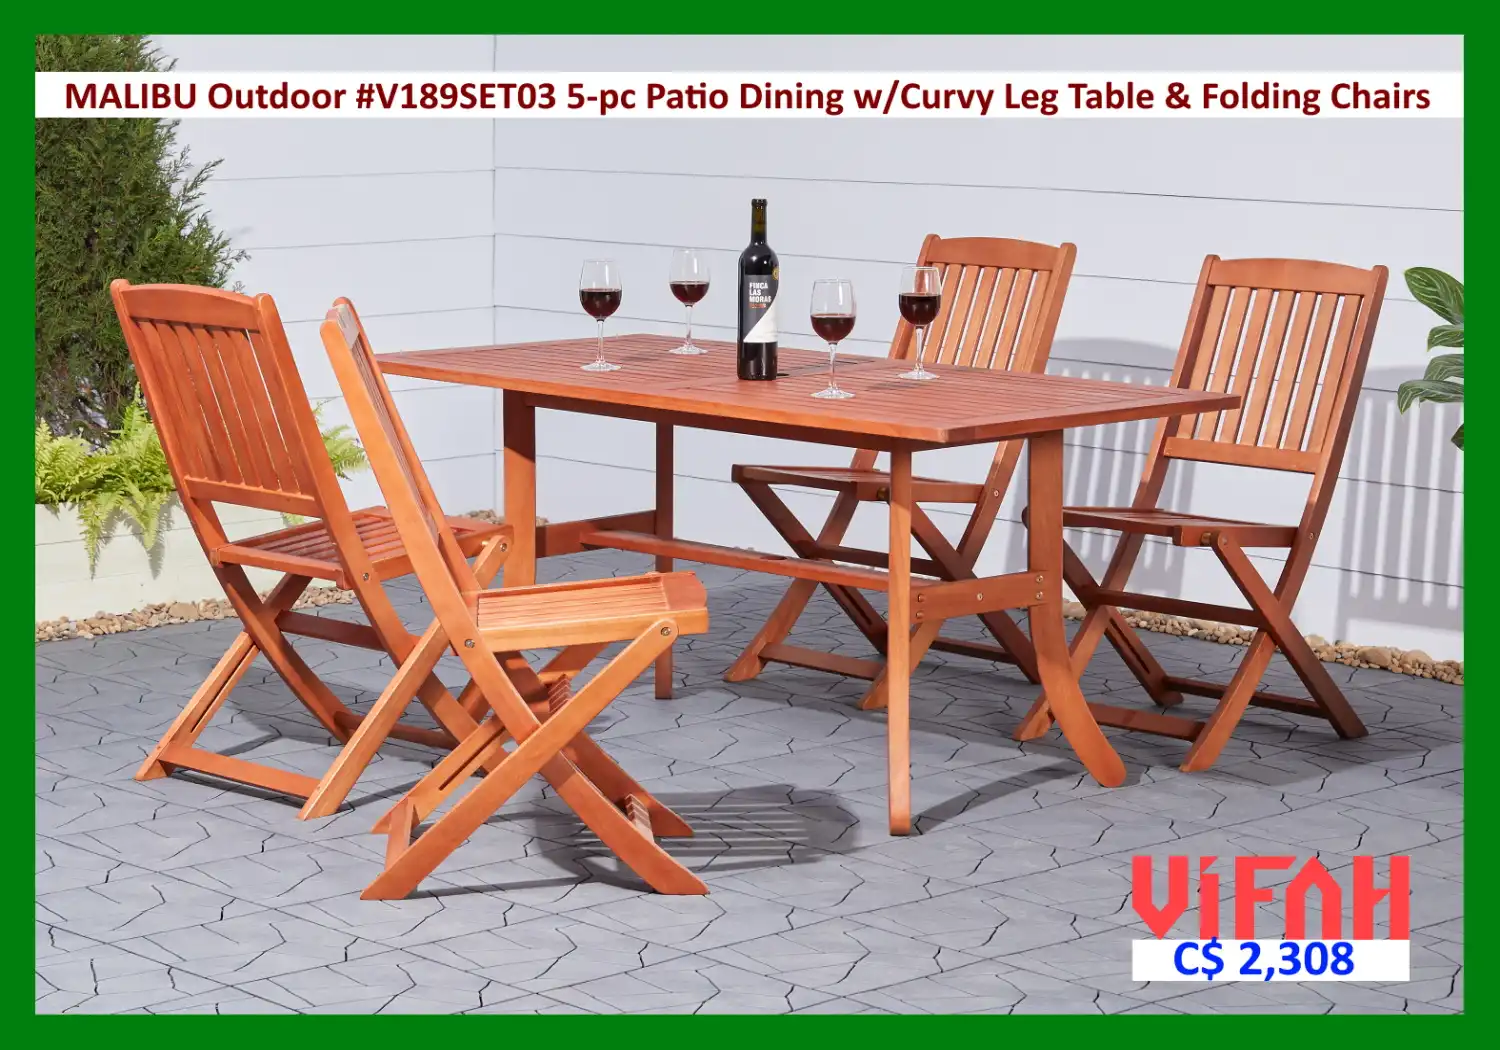 MALIBU Outdoor #V189SET03 5-piece Wood Patio Dining Set with Curvy Leg Table & Folding Chairs